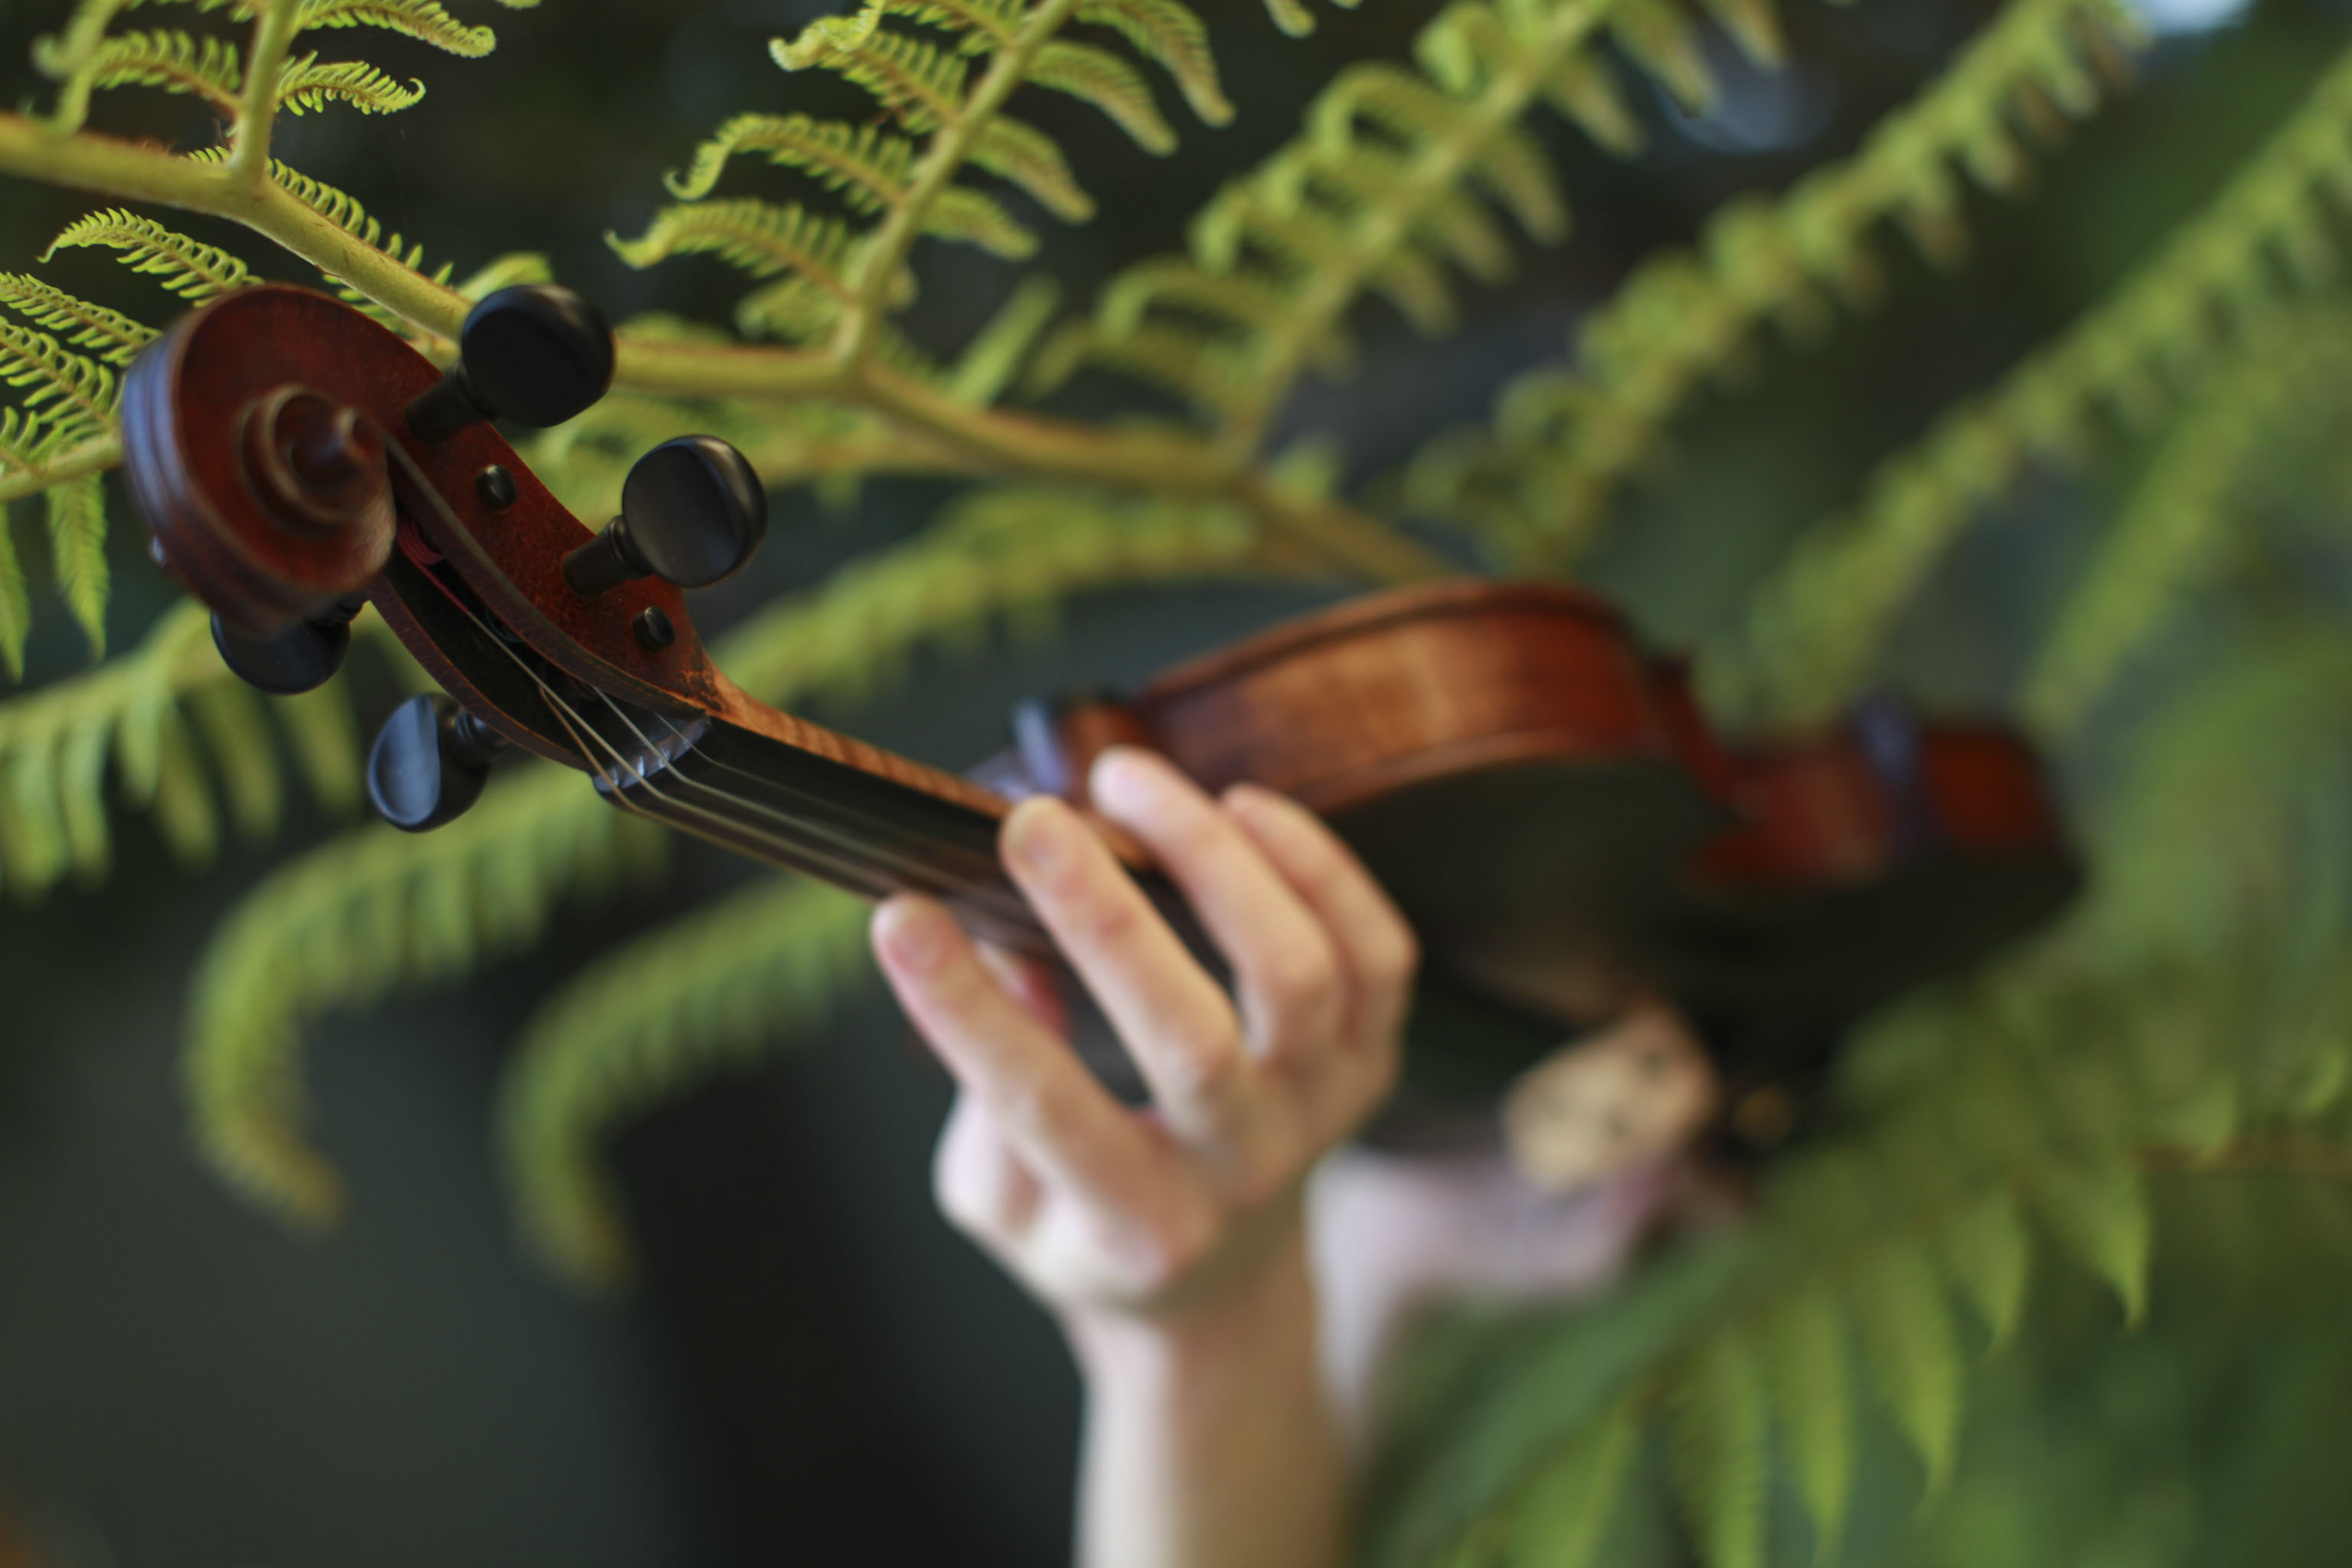 Violin with hand and fern